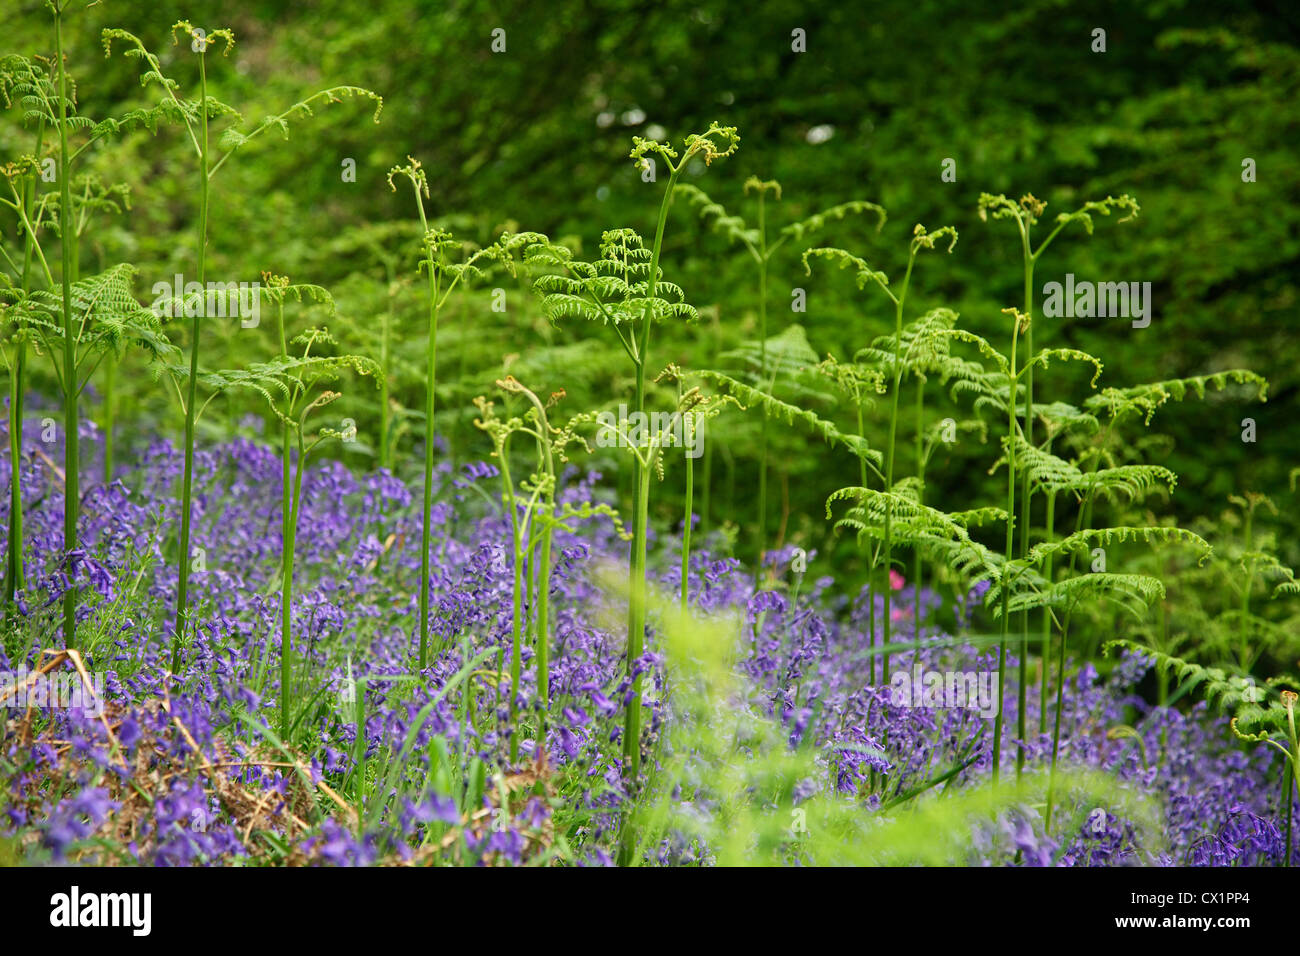 Young Ferns (Phylum Pteridophyta), Blue Bells, (Hyacinthoides non-scripta), Clytha Hill, Monmouthshire, Wales, UK Stock Photo